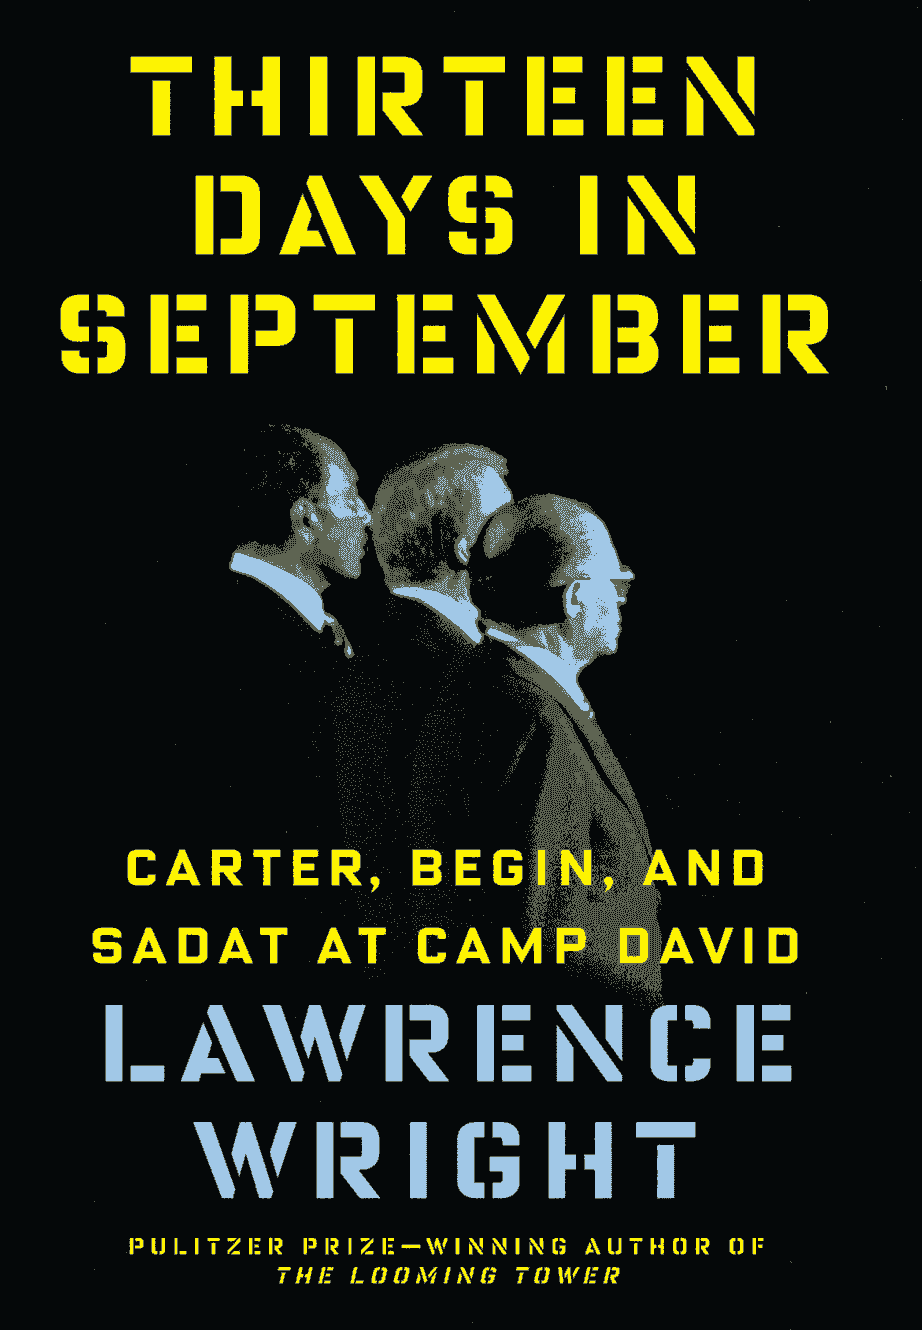 Thirteen Days in September by Lawrence Wright